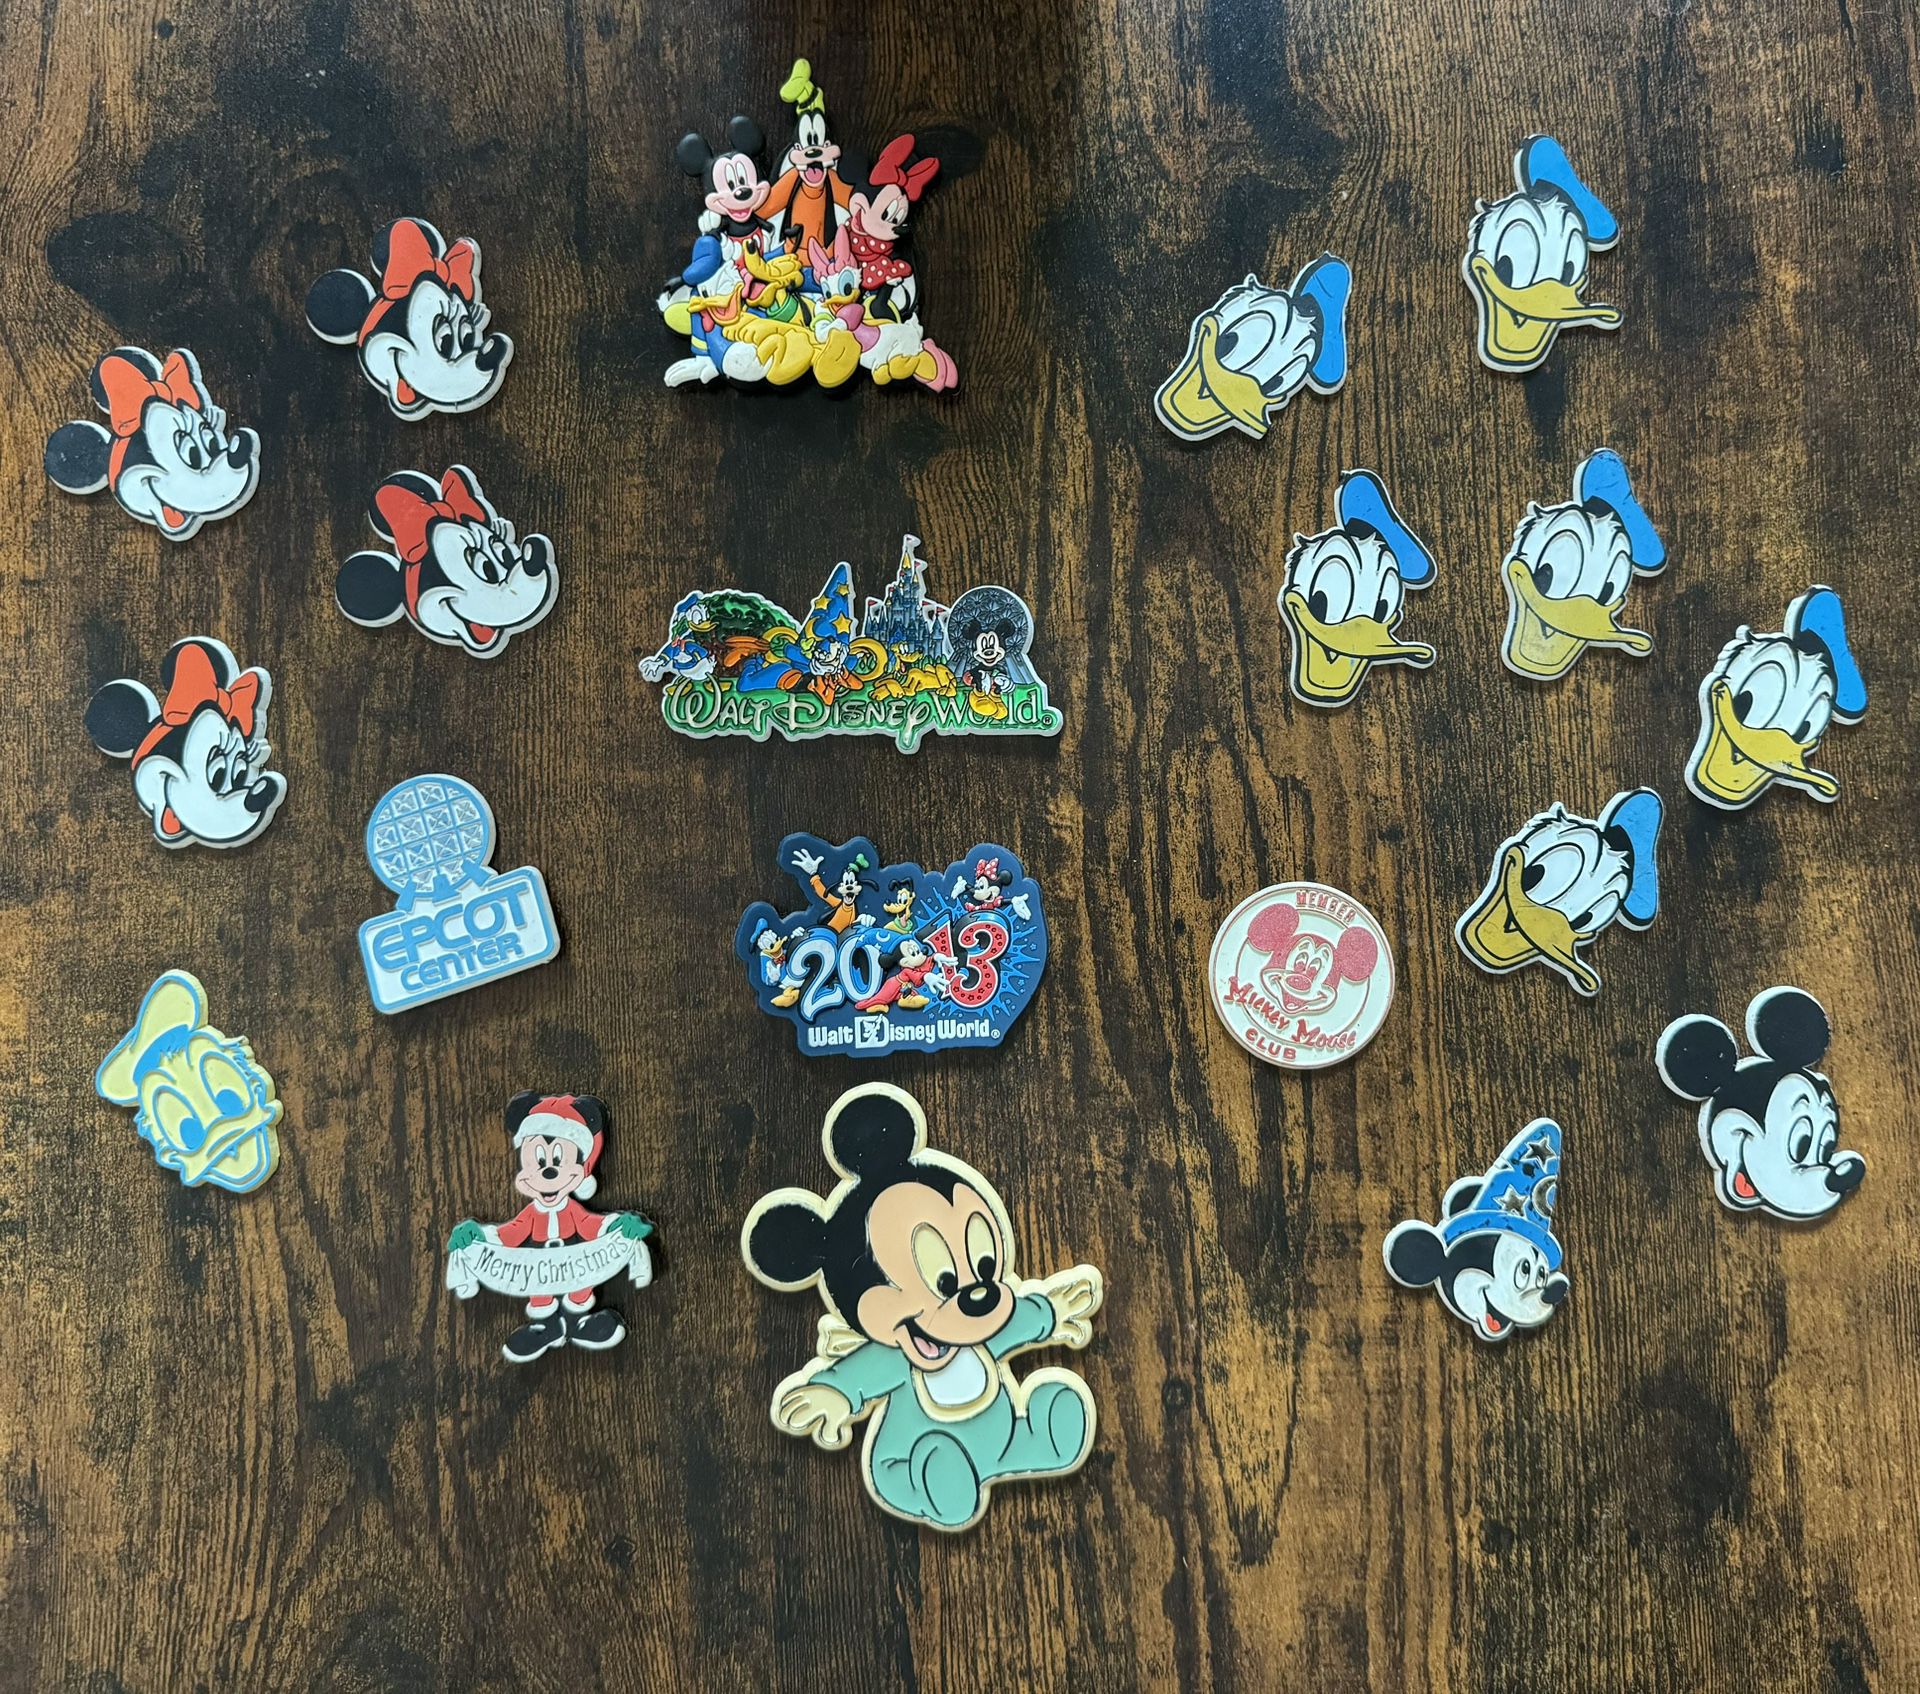 Disney Lot of Mostly Vintage Magnets Mickey Minnie Goofy Donald etc $25 for All xox